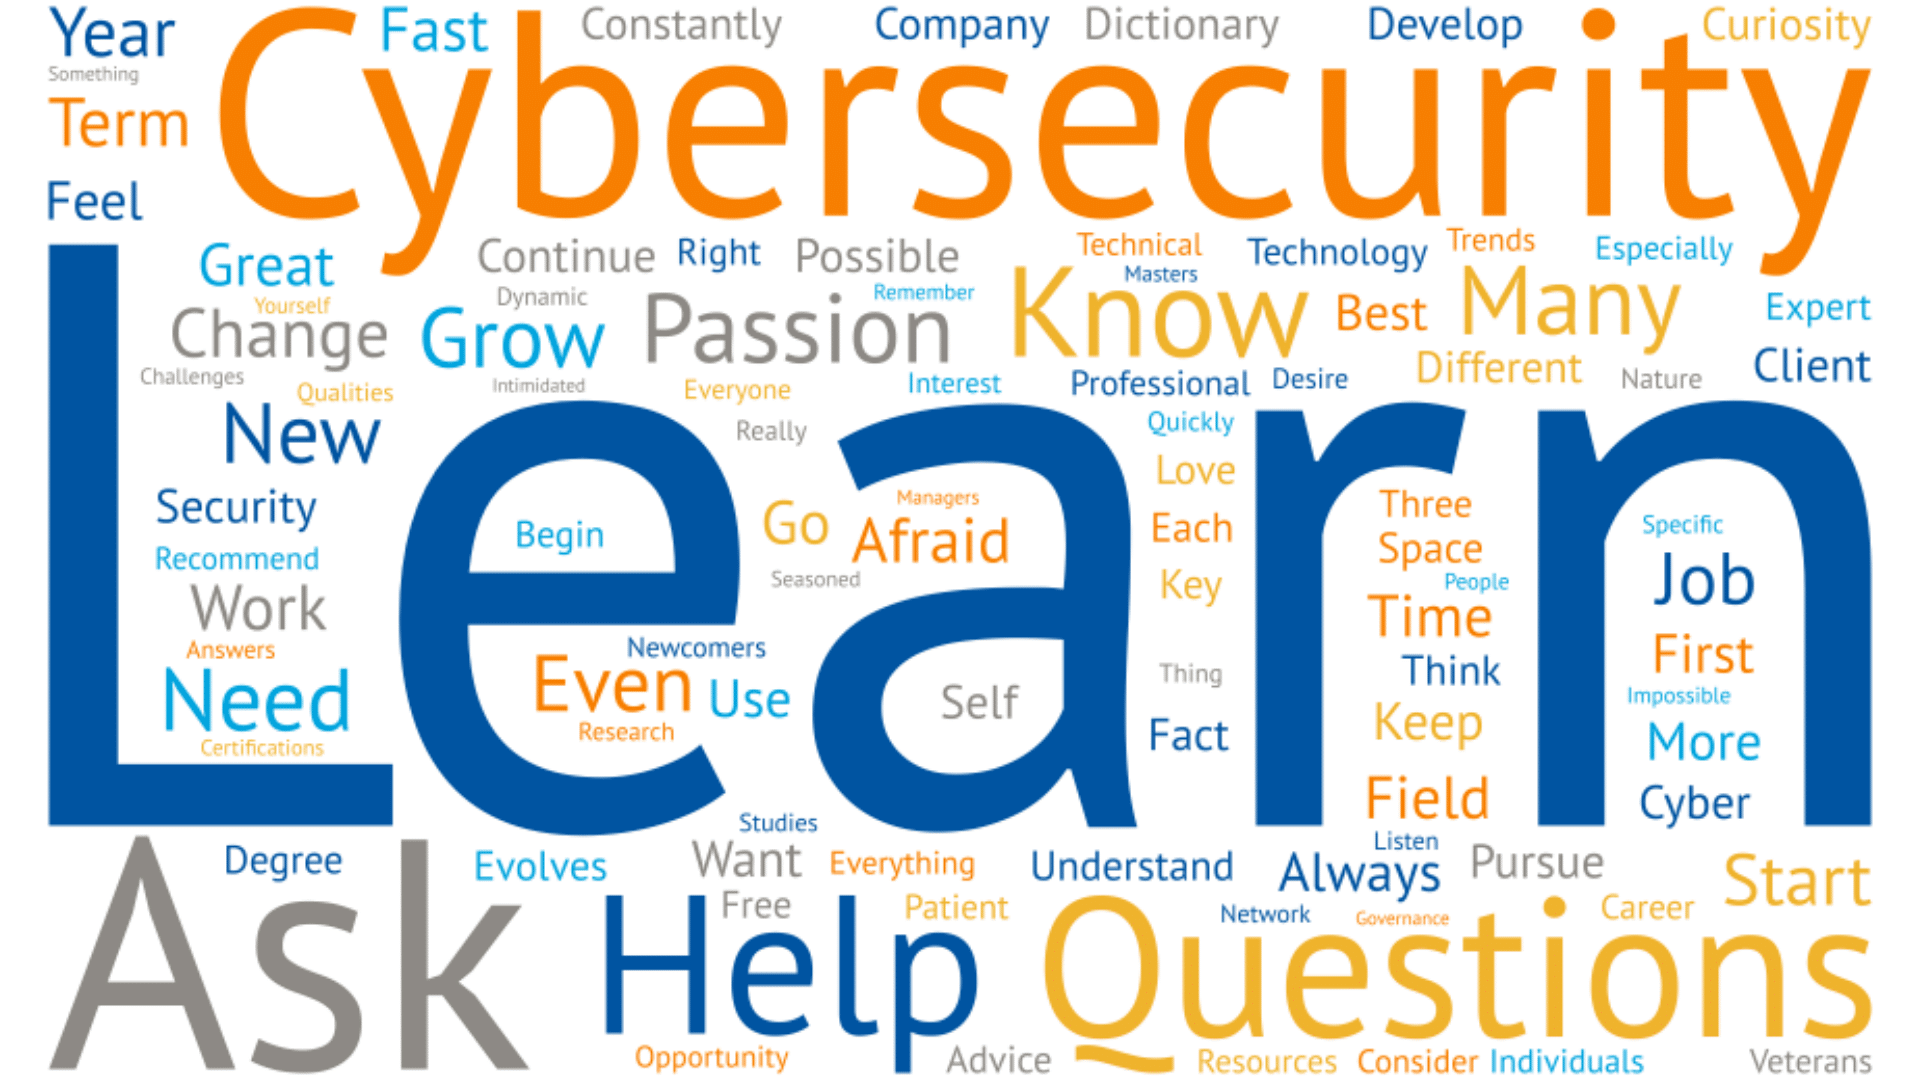 Advice from BARR Associates on Starting a Career in Cybersecurity